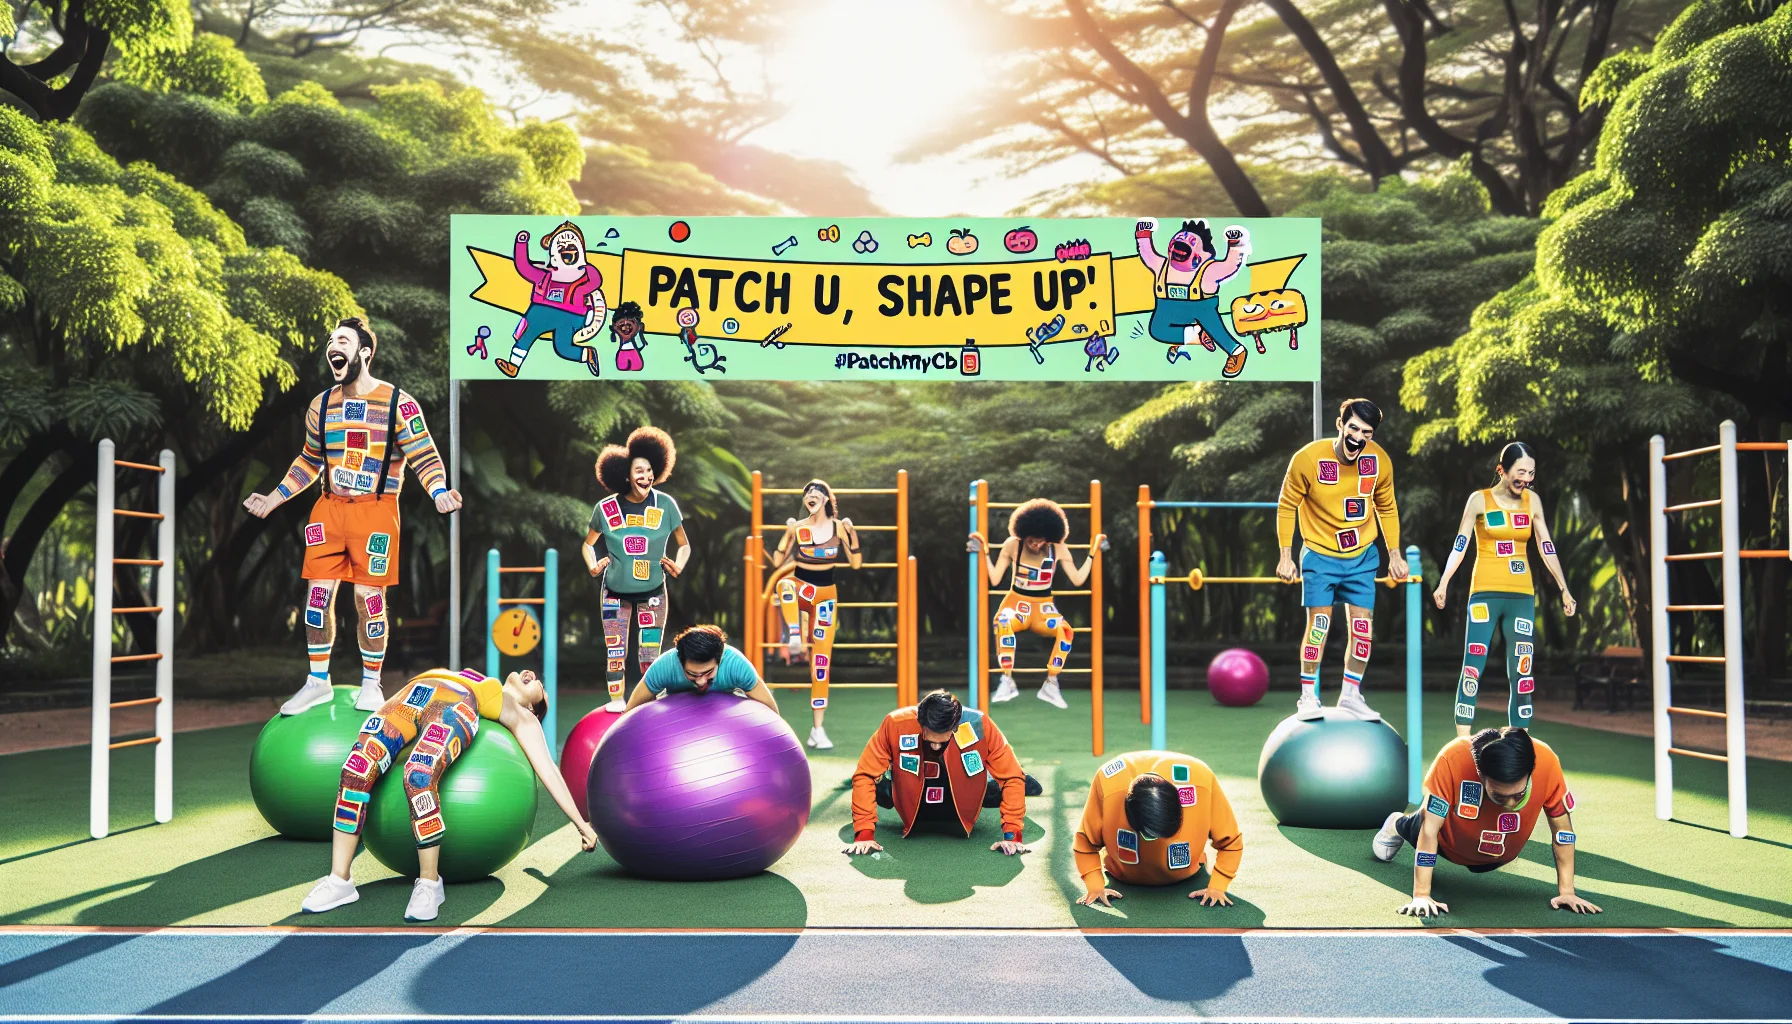 Create an amusing scenario that showcases the concept of 'Patch Your Way to Fitness.' It could be an image of a diverse group of people with various body types, all wearing comically oversized, brightly colored adhesive patches on their workout clothes, denoted as 'PatchMyCB.' The scene can be set in a sunny park filled with exercise stations. Show the individuals laughingly trying to balance on fitness balls or attempting pushups, with patches are sticking out comically or falling off. Add a motivational slogan like 'Patch Up, Shape Up!' on the banner across the top of the image.